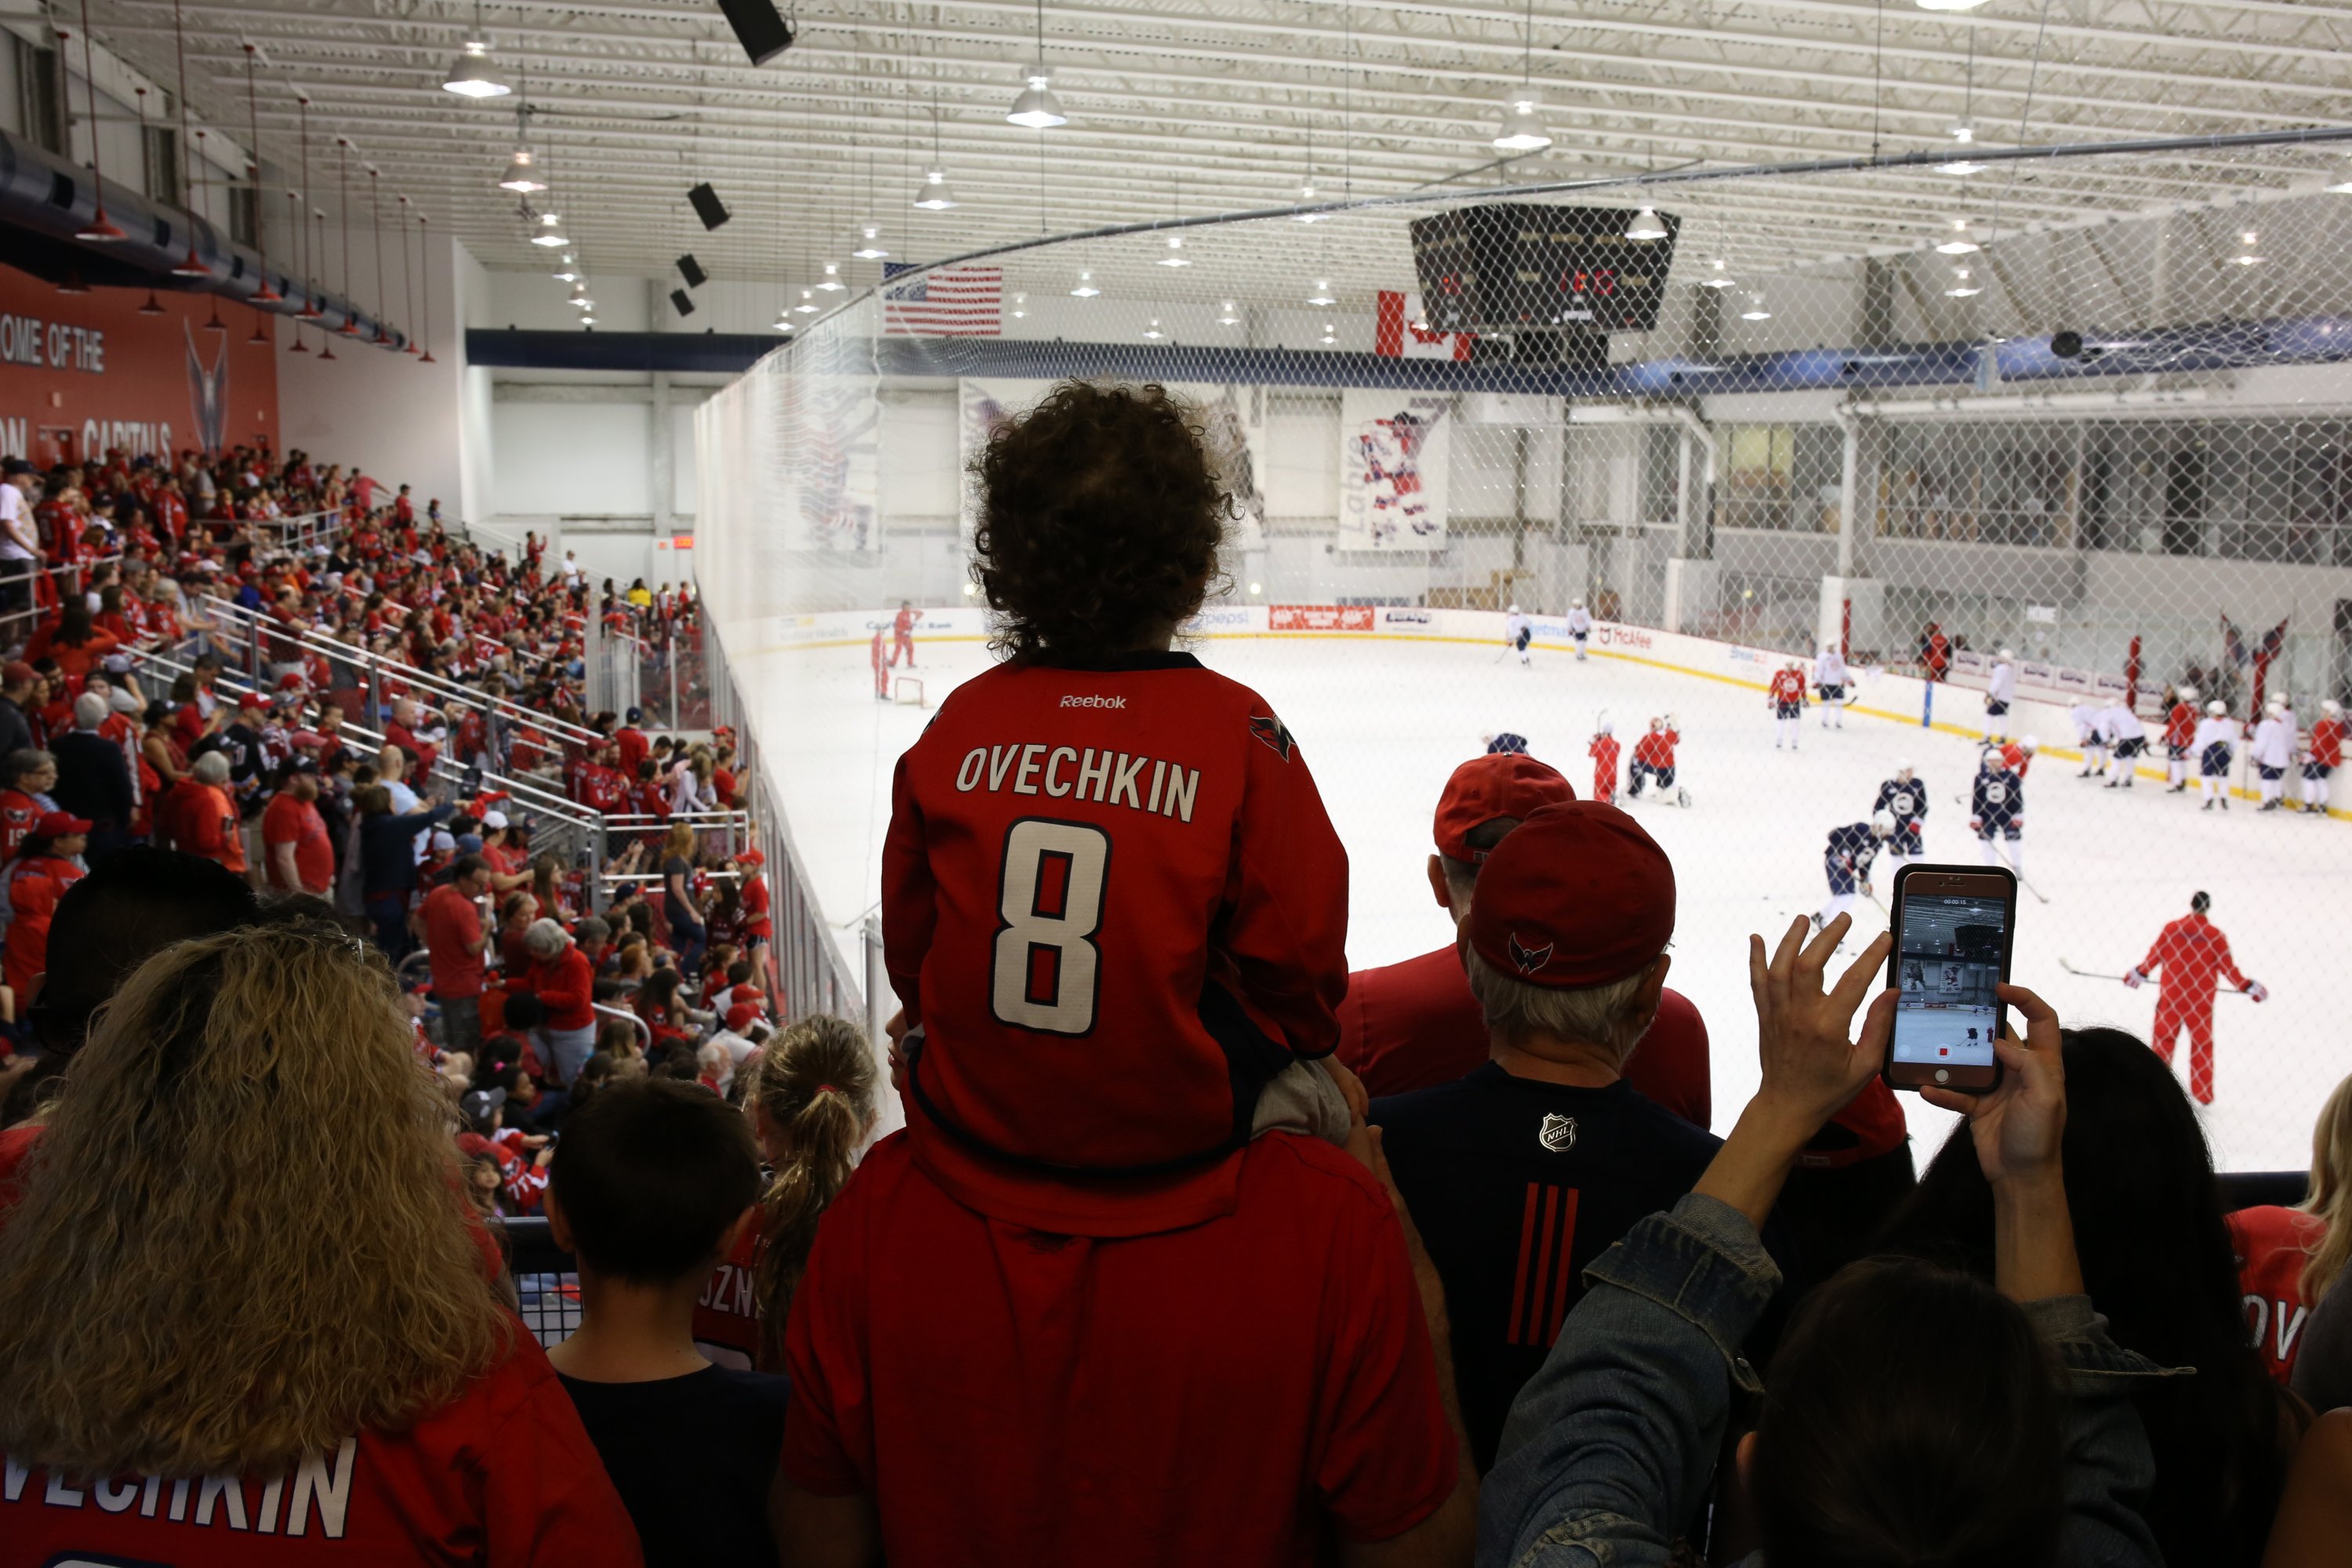 Kettler Capitals Iceplex: A Fan's Guide to the Capitals' Practice